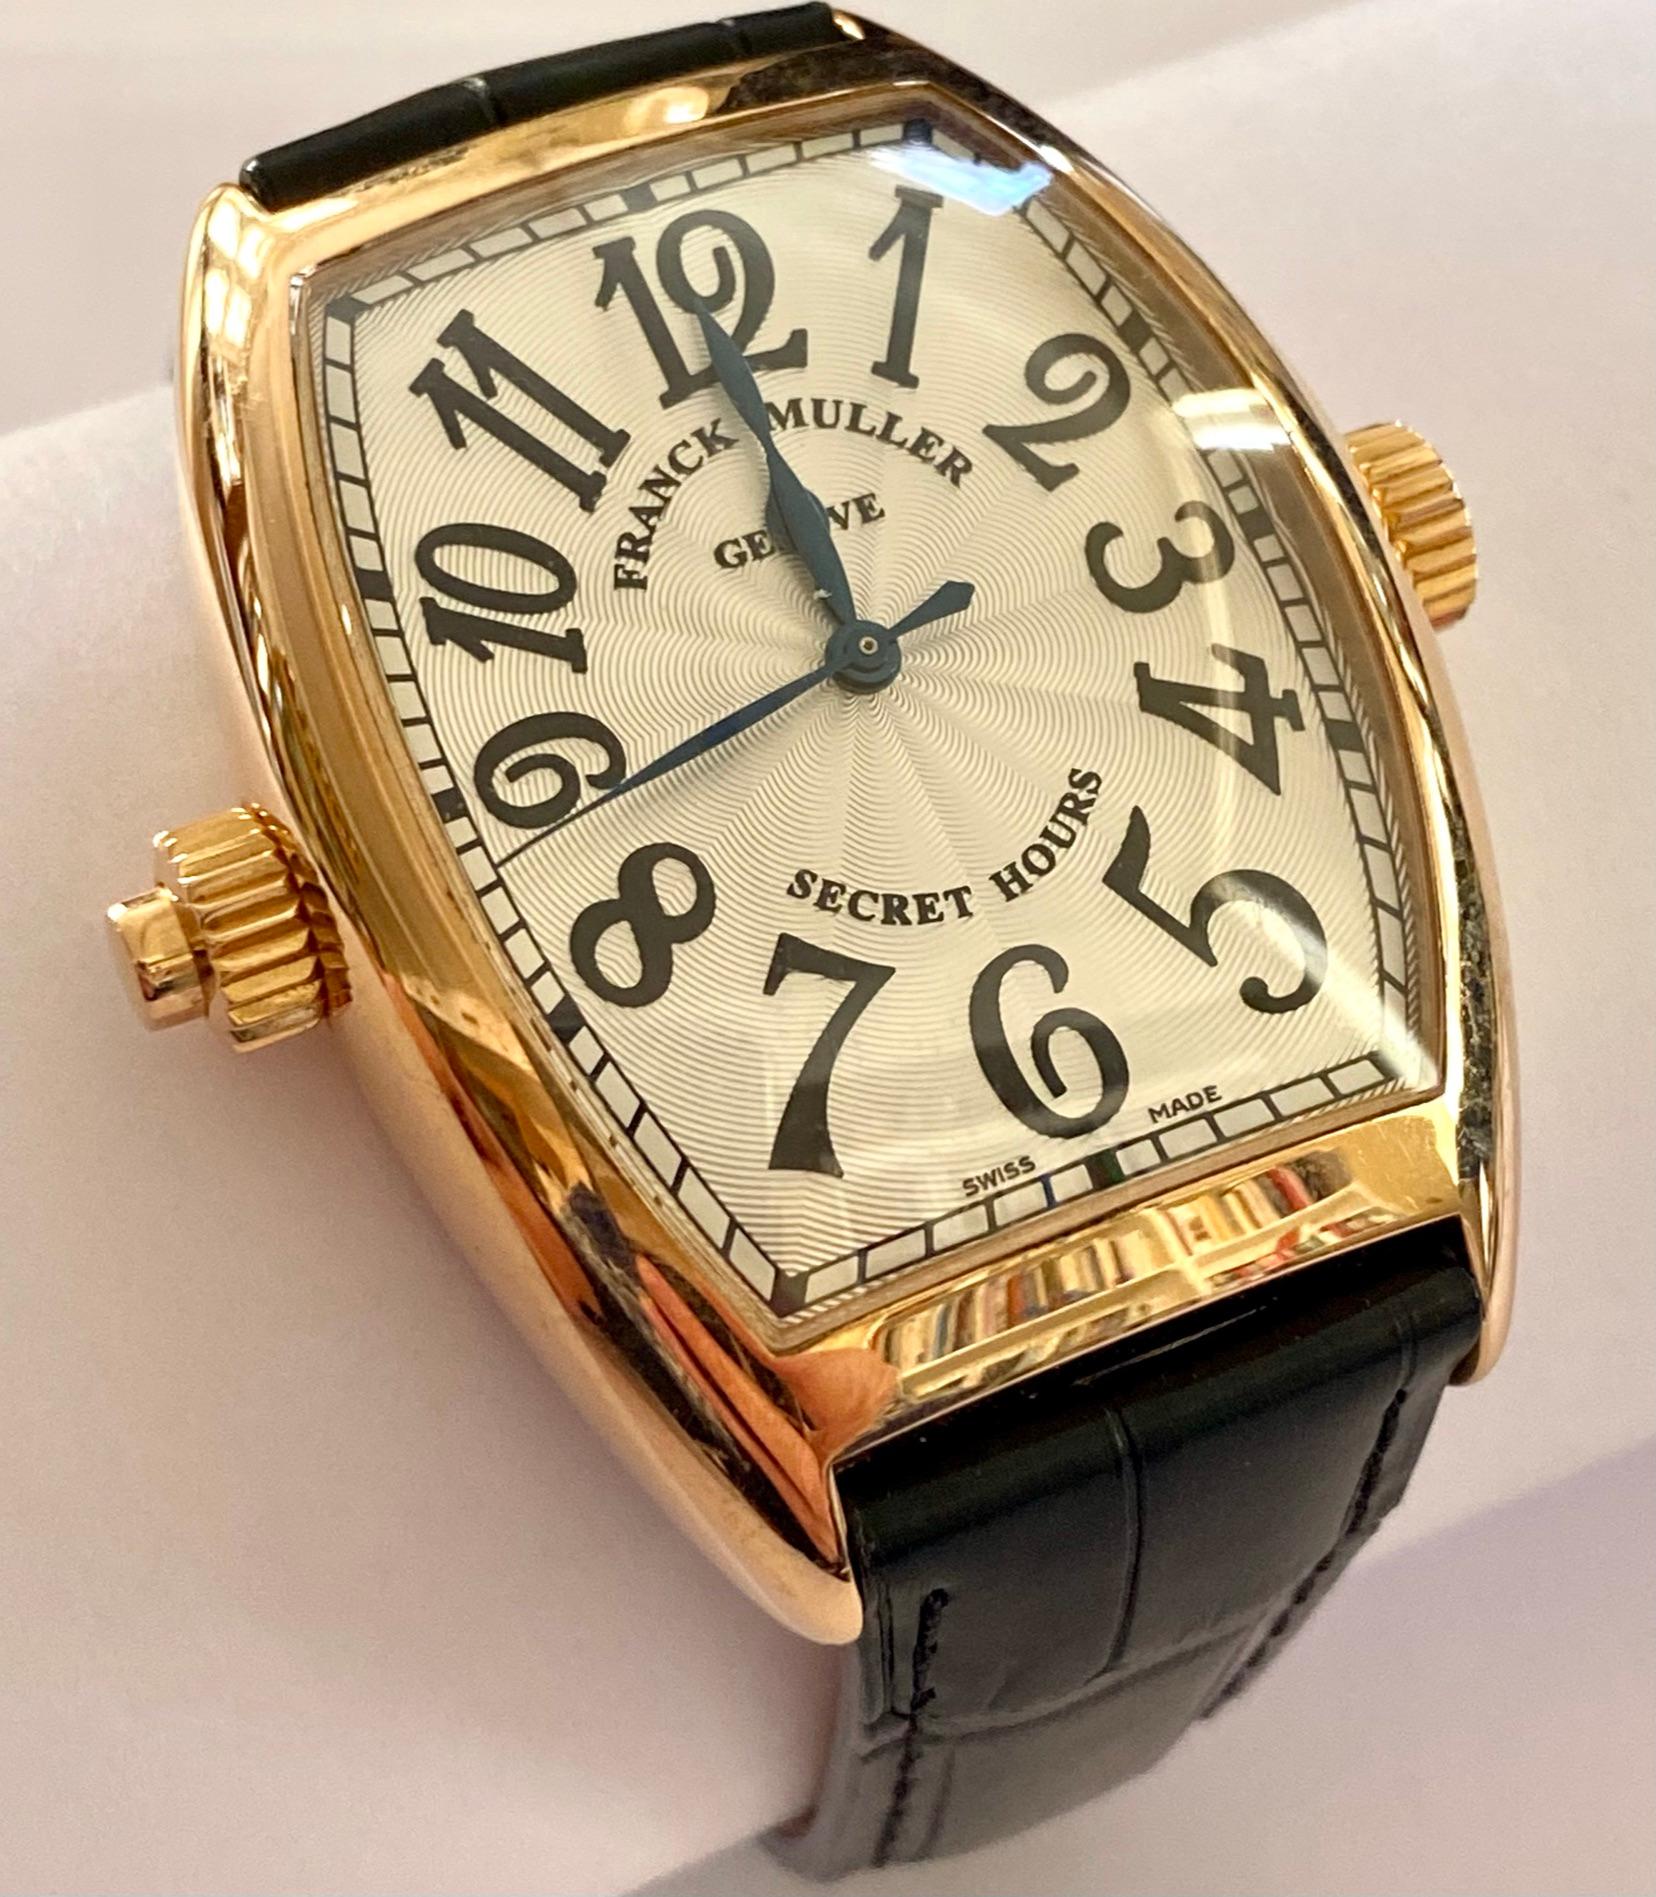 .One (1) 18K. rose Gold watch with a leather strap.
Brand: Franck. Muller
Type: Cintree Curvex
Secrecy & Ingenuity
The Secret Hours embodies the inventiveness and ingenuity of Franck Muller, and allows time to be suspended until its owner decides